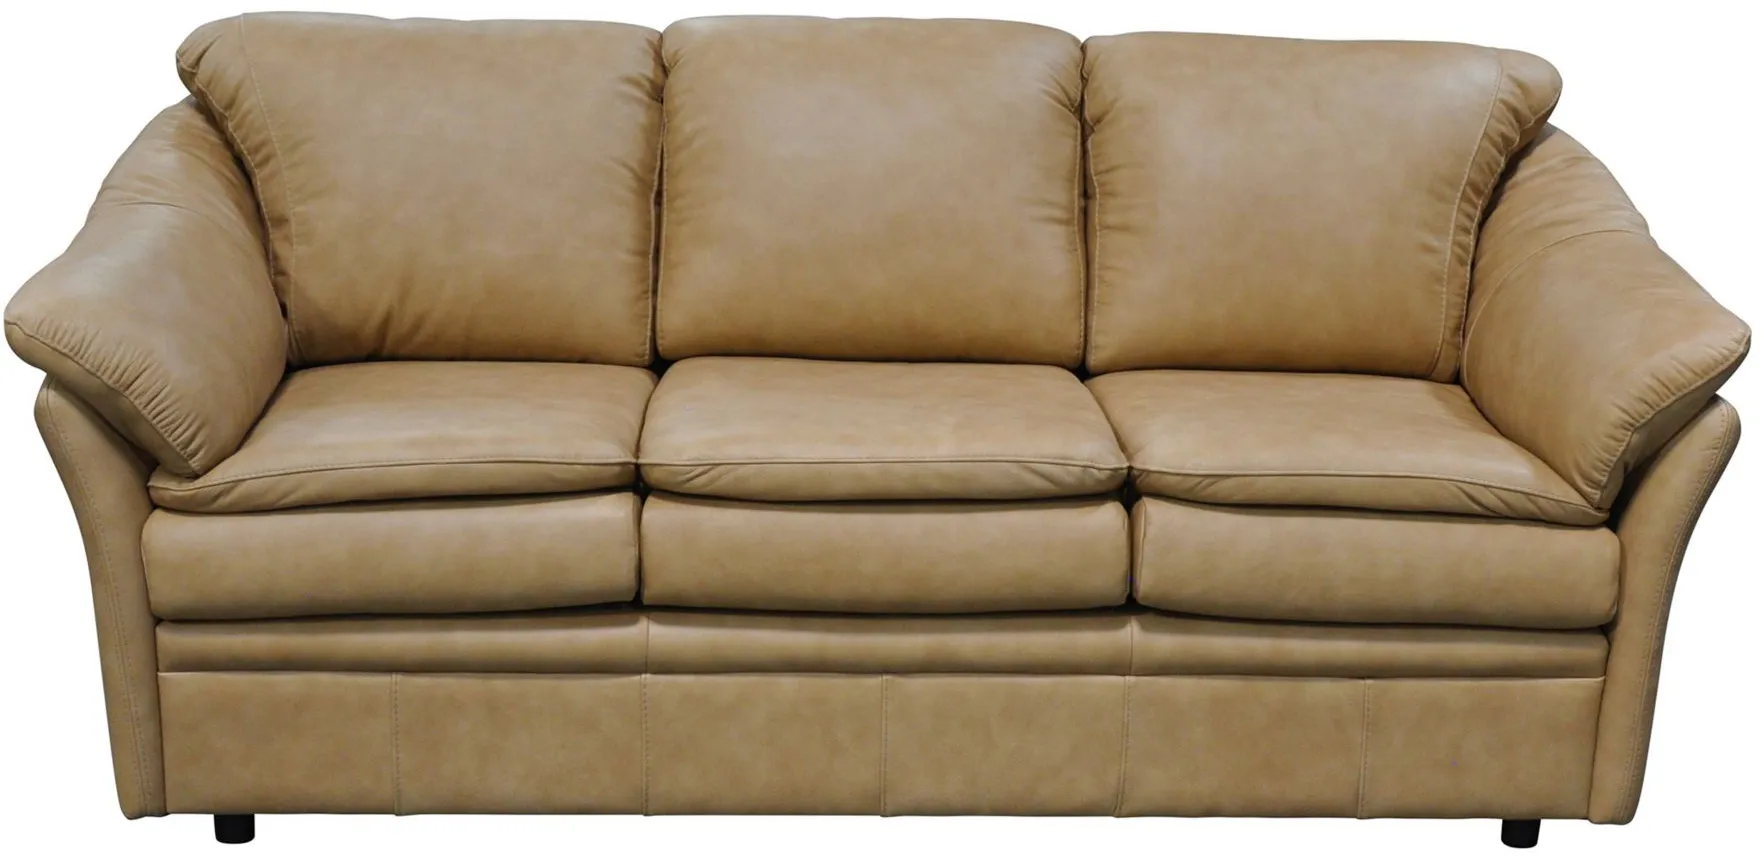 Uptown Sofa in Urban Wheat by Omnia Leather